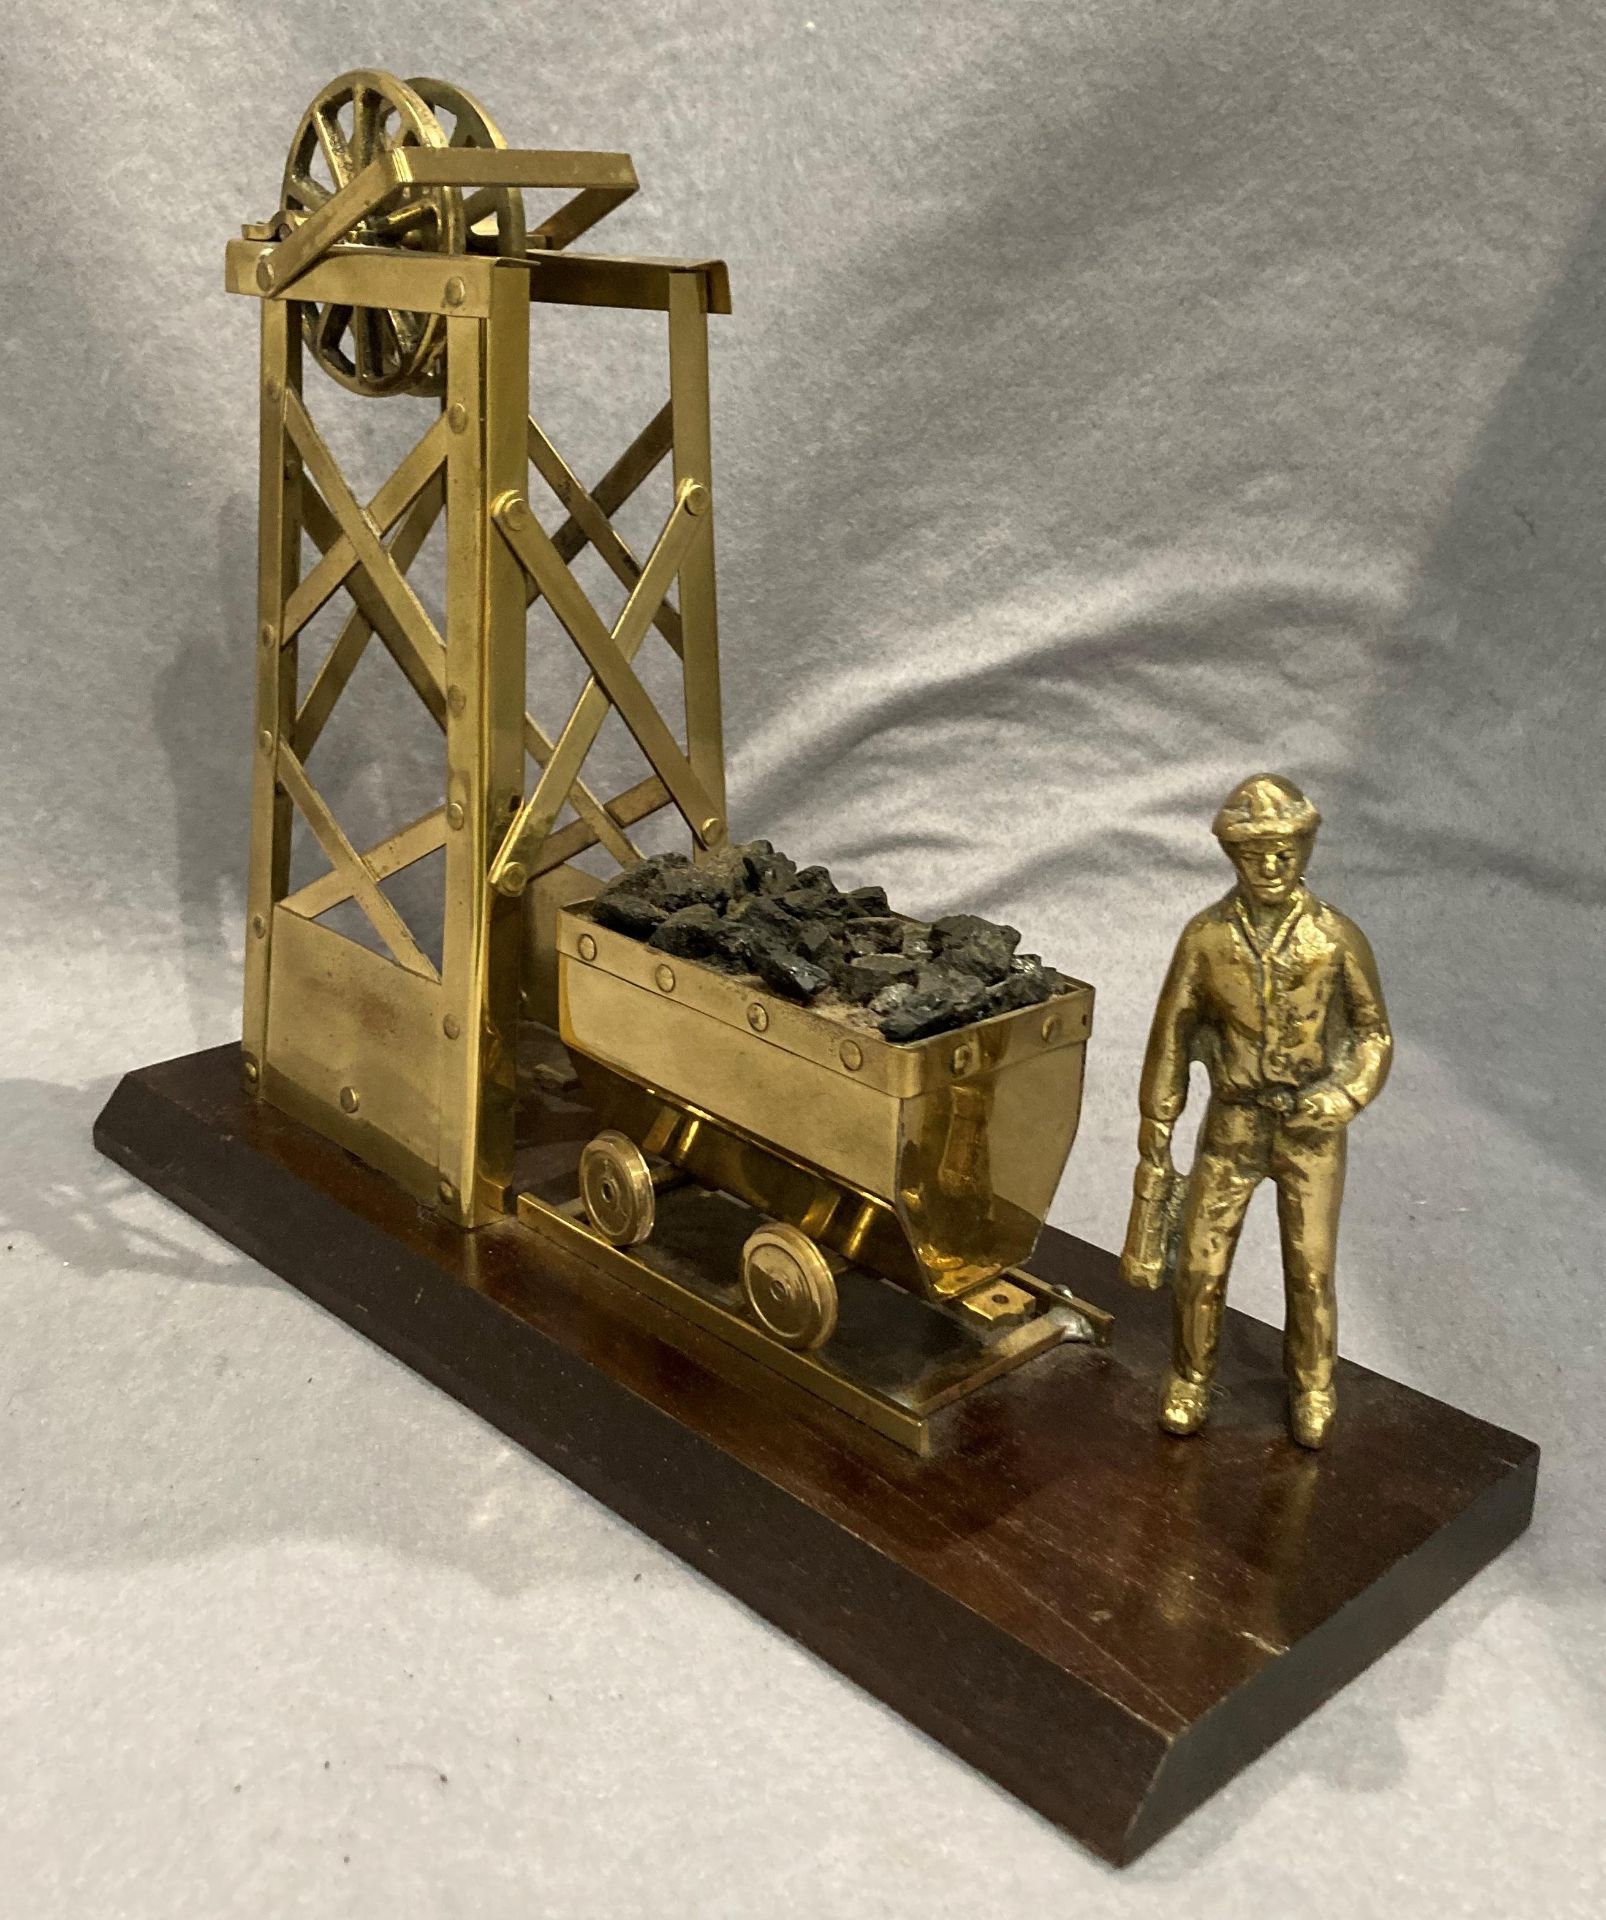 A brass mining model featuring a miner, - Image 2 of 2